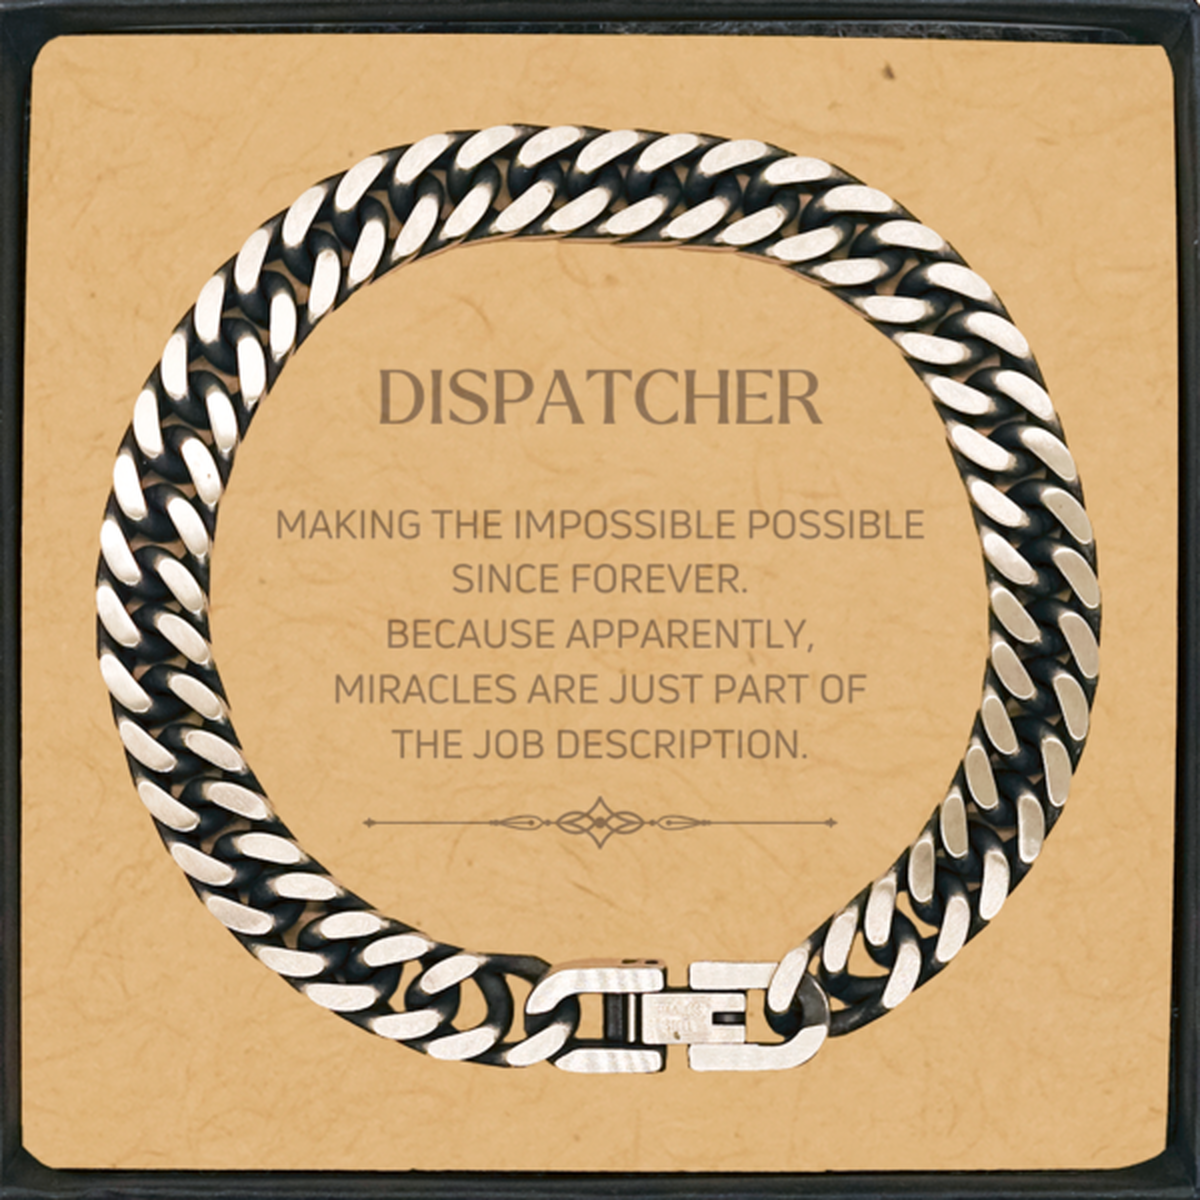 Funny Dispatcher Gifts, Miracles are just part of the job description, Inspirational Birthday Cuban Link Chain Bracelet For Dispatcher, Men, Women, Coworkers, Friends, Boss